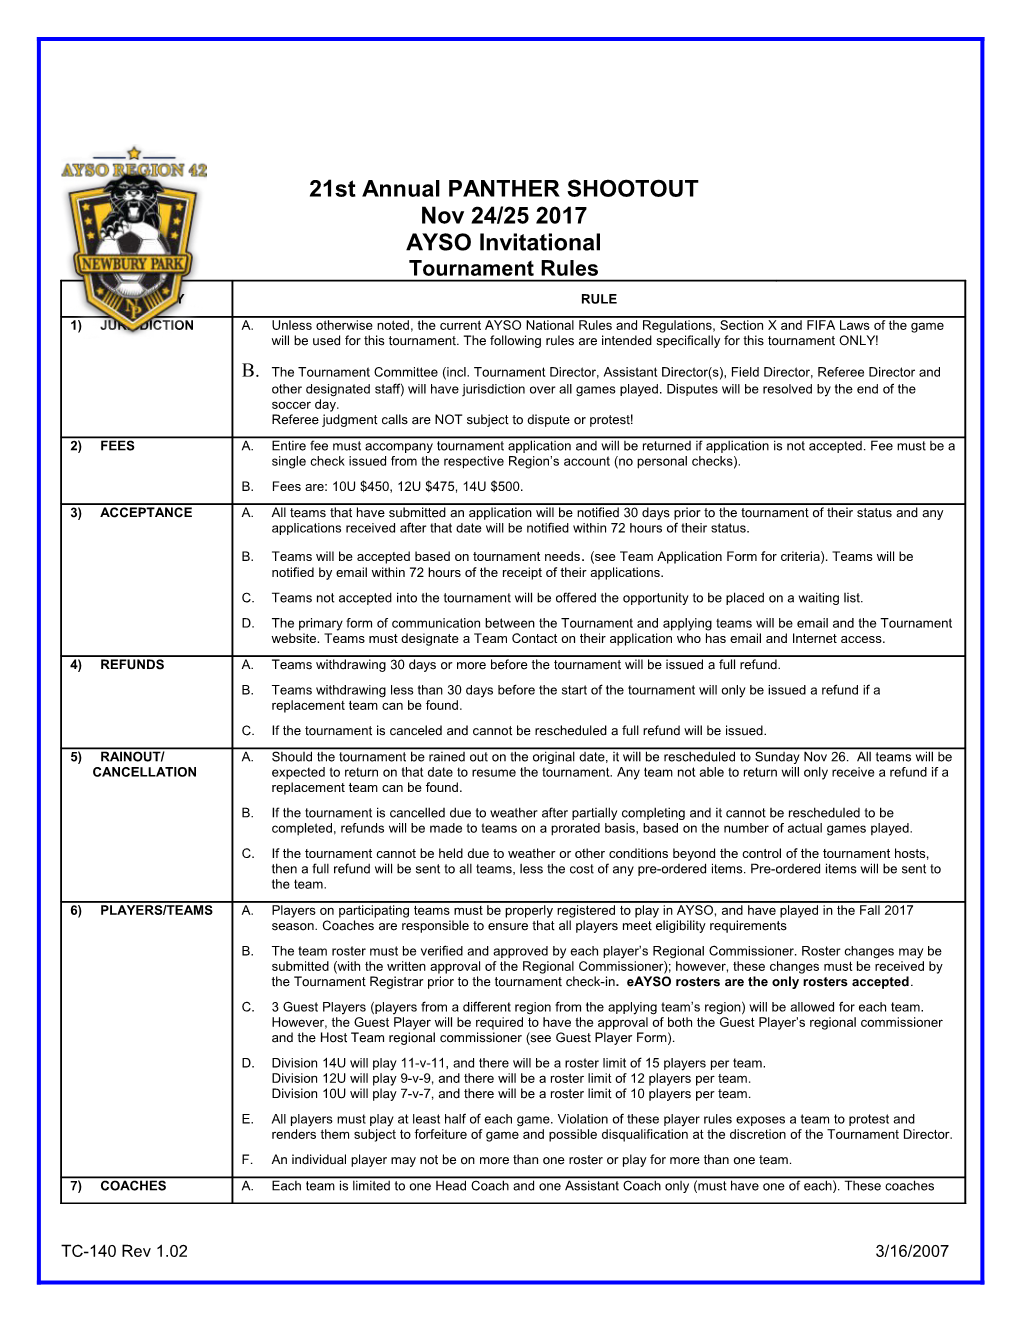 Unless Otherwise Noted, the Current AYSO National Rules and Regulations, Section X And